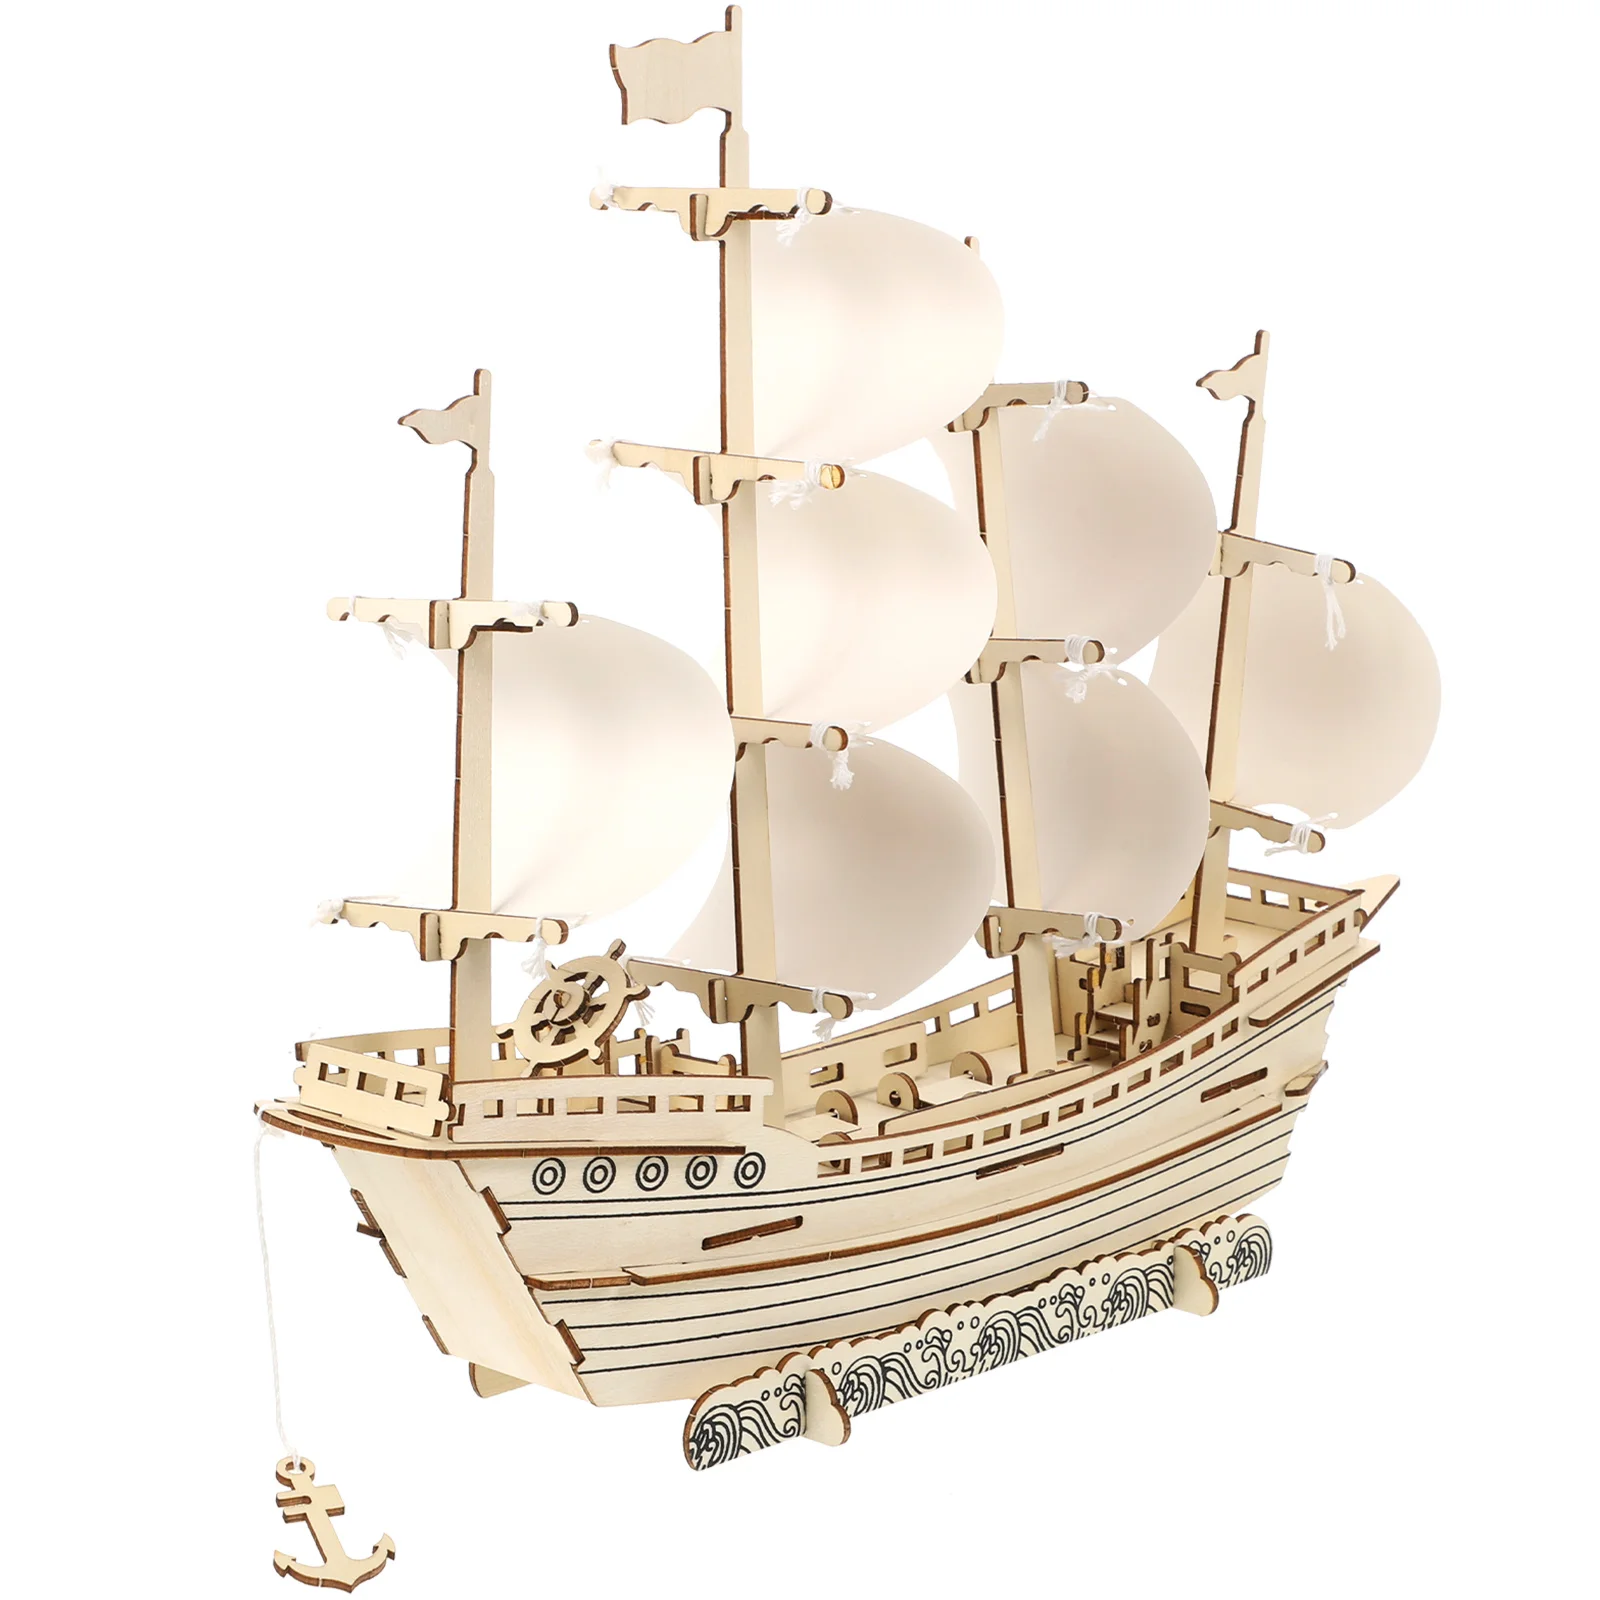 

3D Sailing Jigsaw Puzzle Ship Models Kits Build Adults Brain Teaser Puzzles Ships Assembly Toy Kids Lifelike Sailboat Wooden